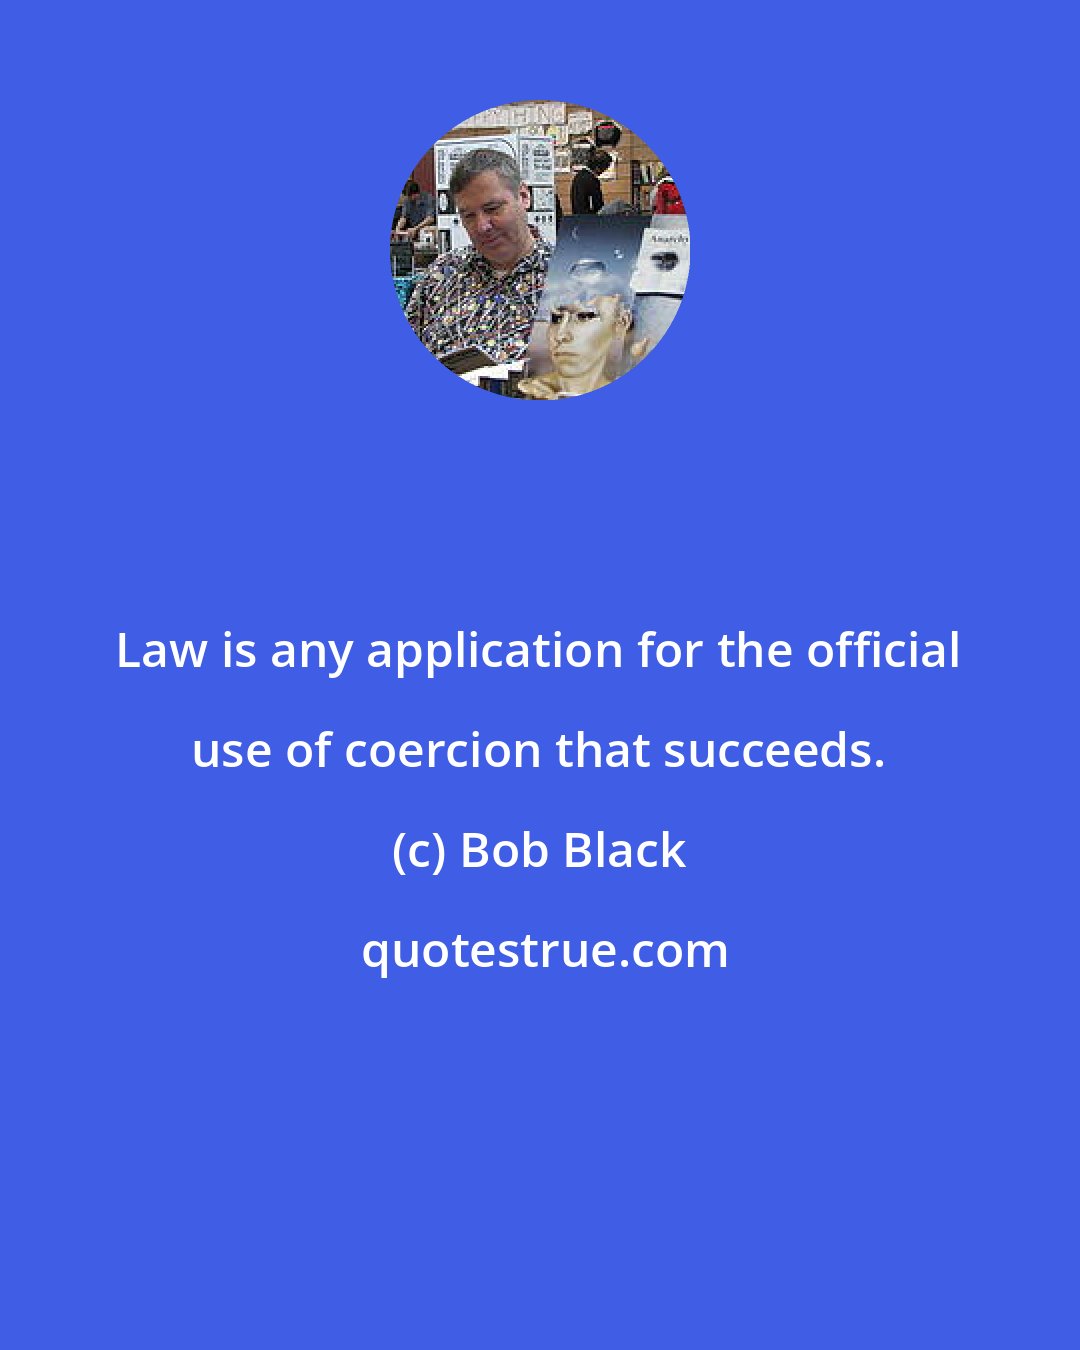 Bob Black: Law is any application for the official use of coercion that succeeds.